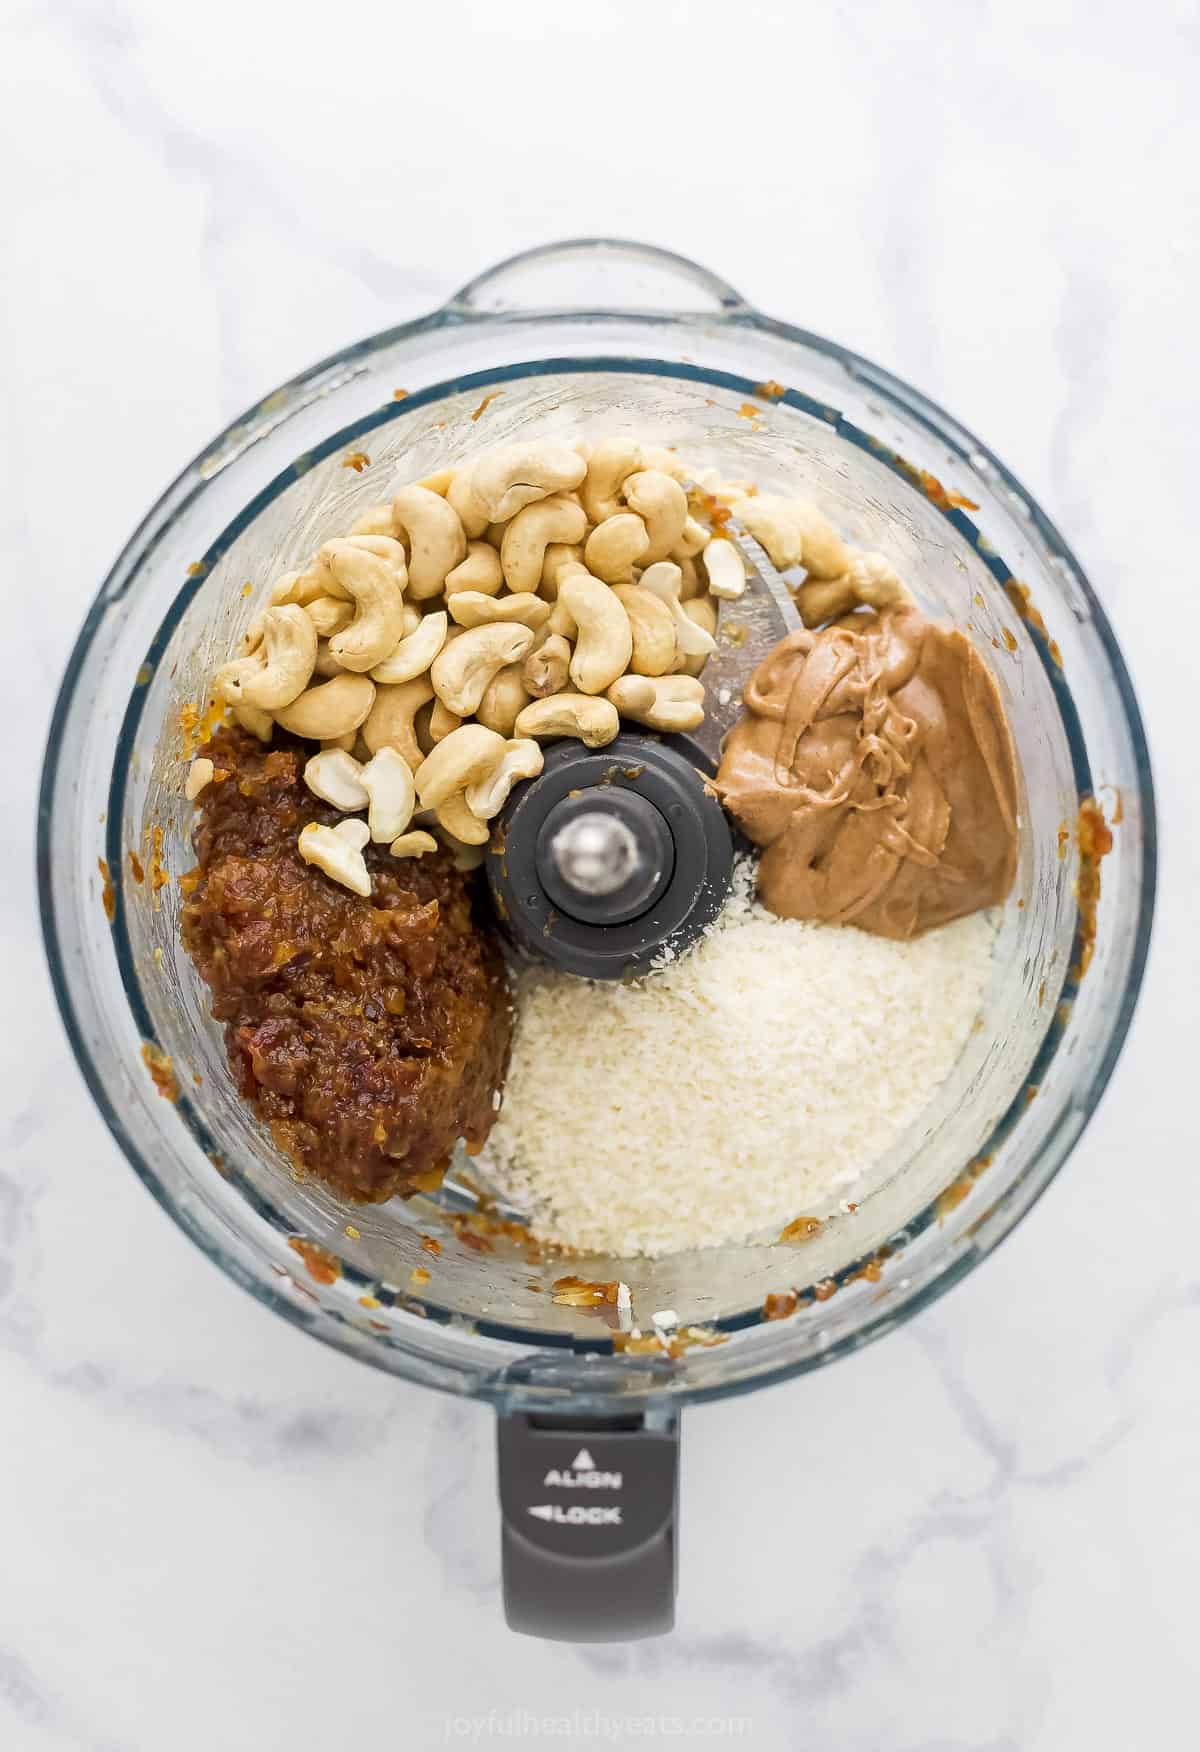 The blended date mixture in a food processor with the cashews, almond butter and coconut